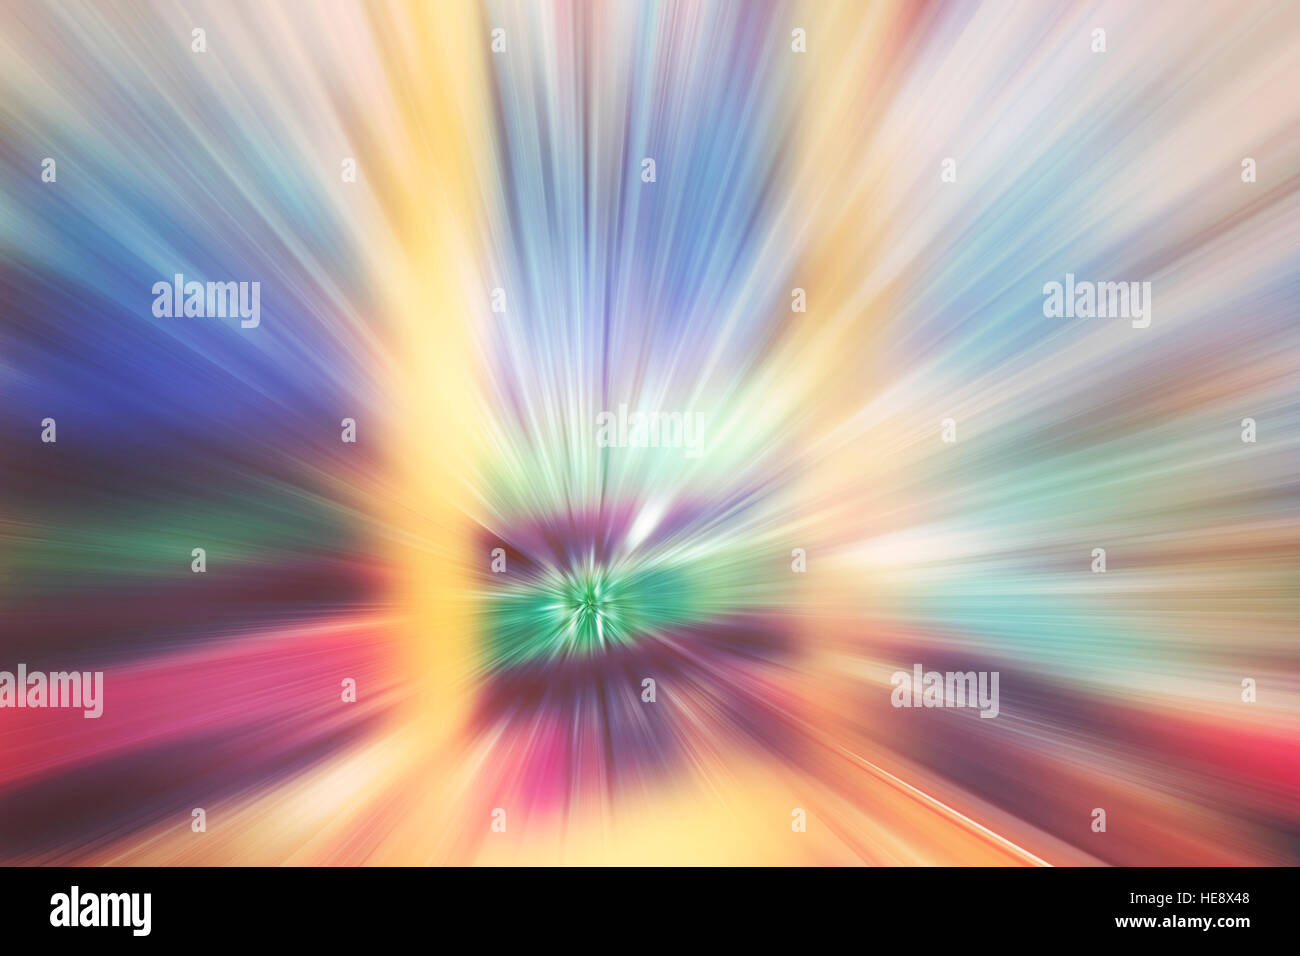 Futuristic motion blurred abstract colorful background or wallpaper. Stock Photo